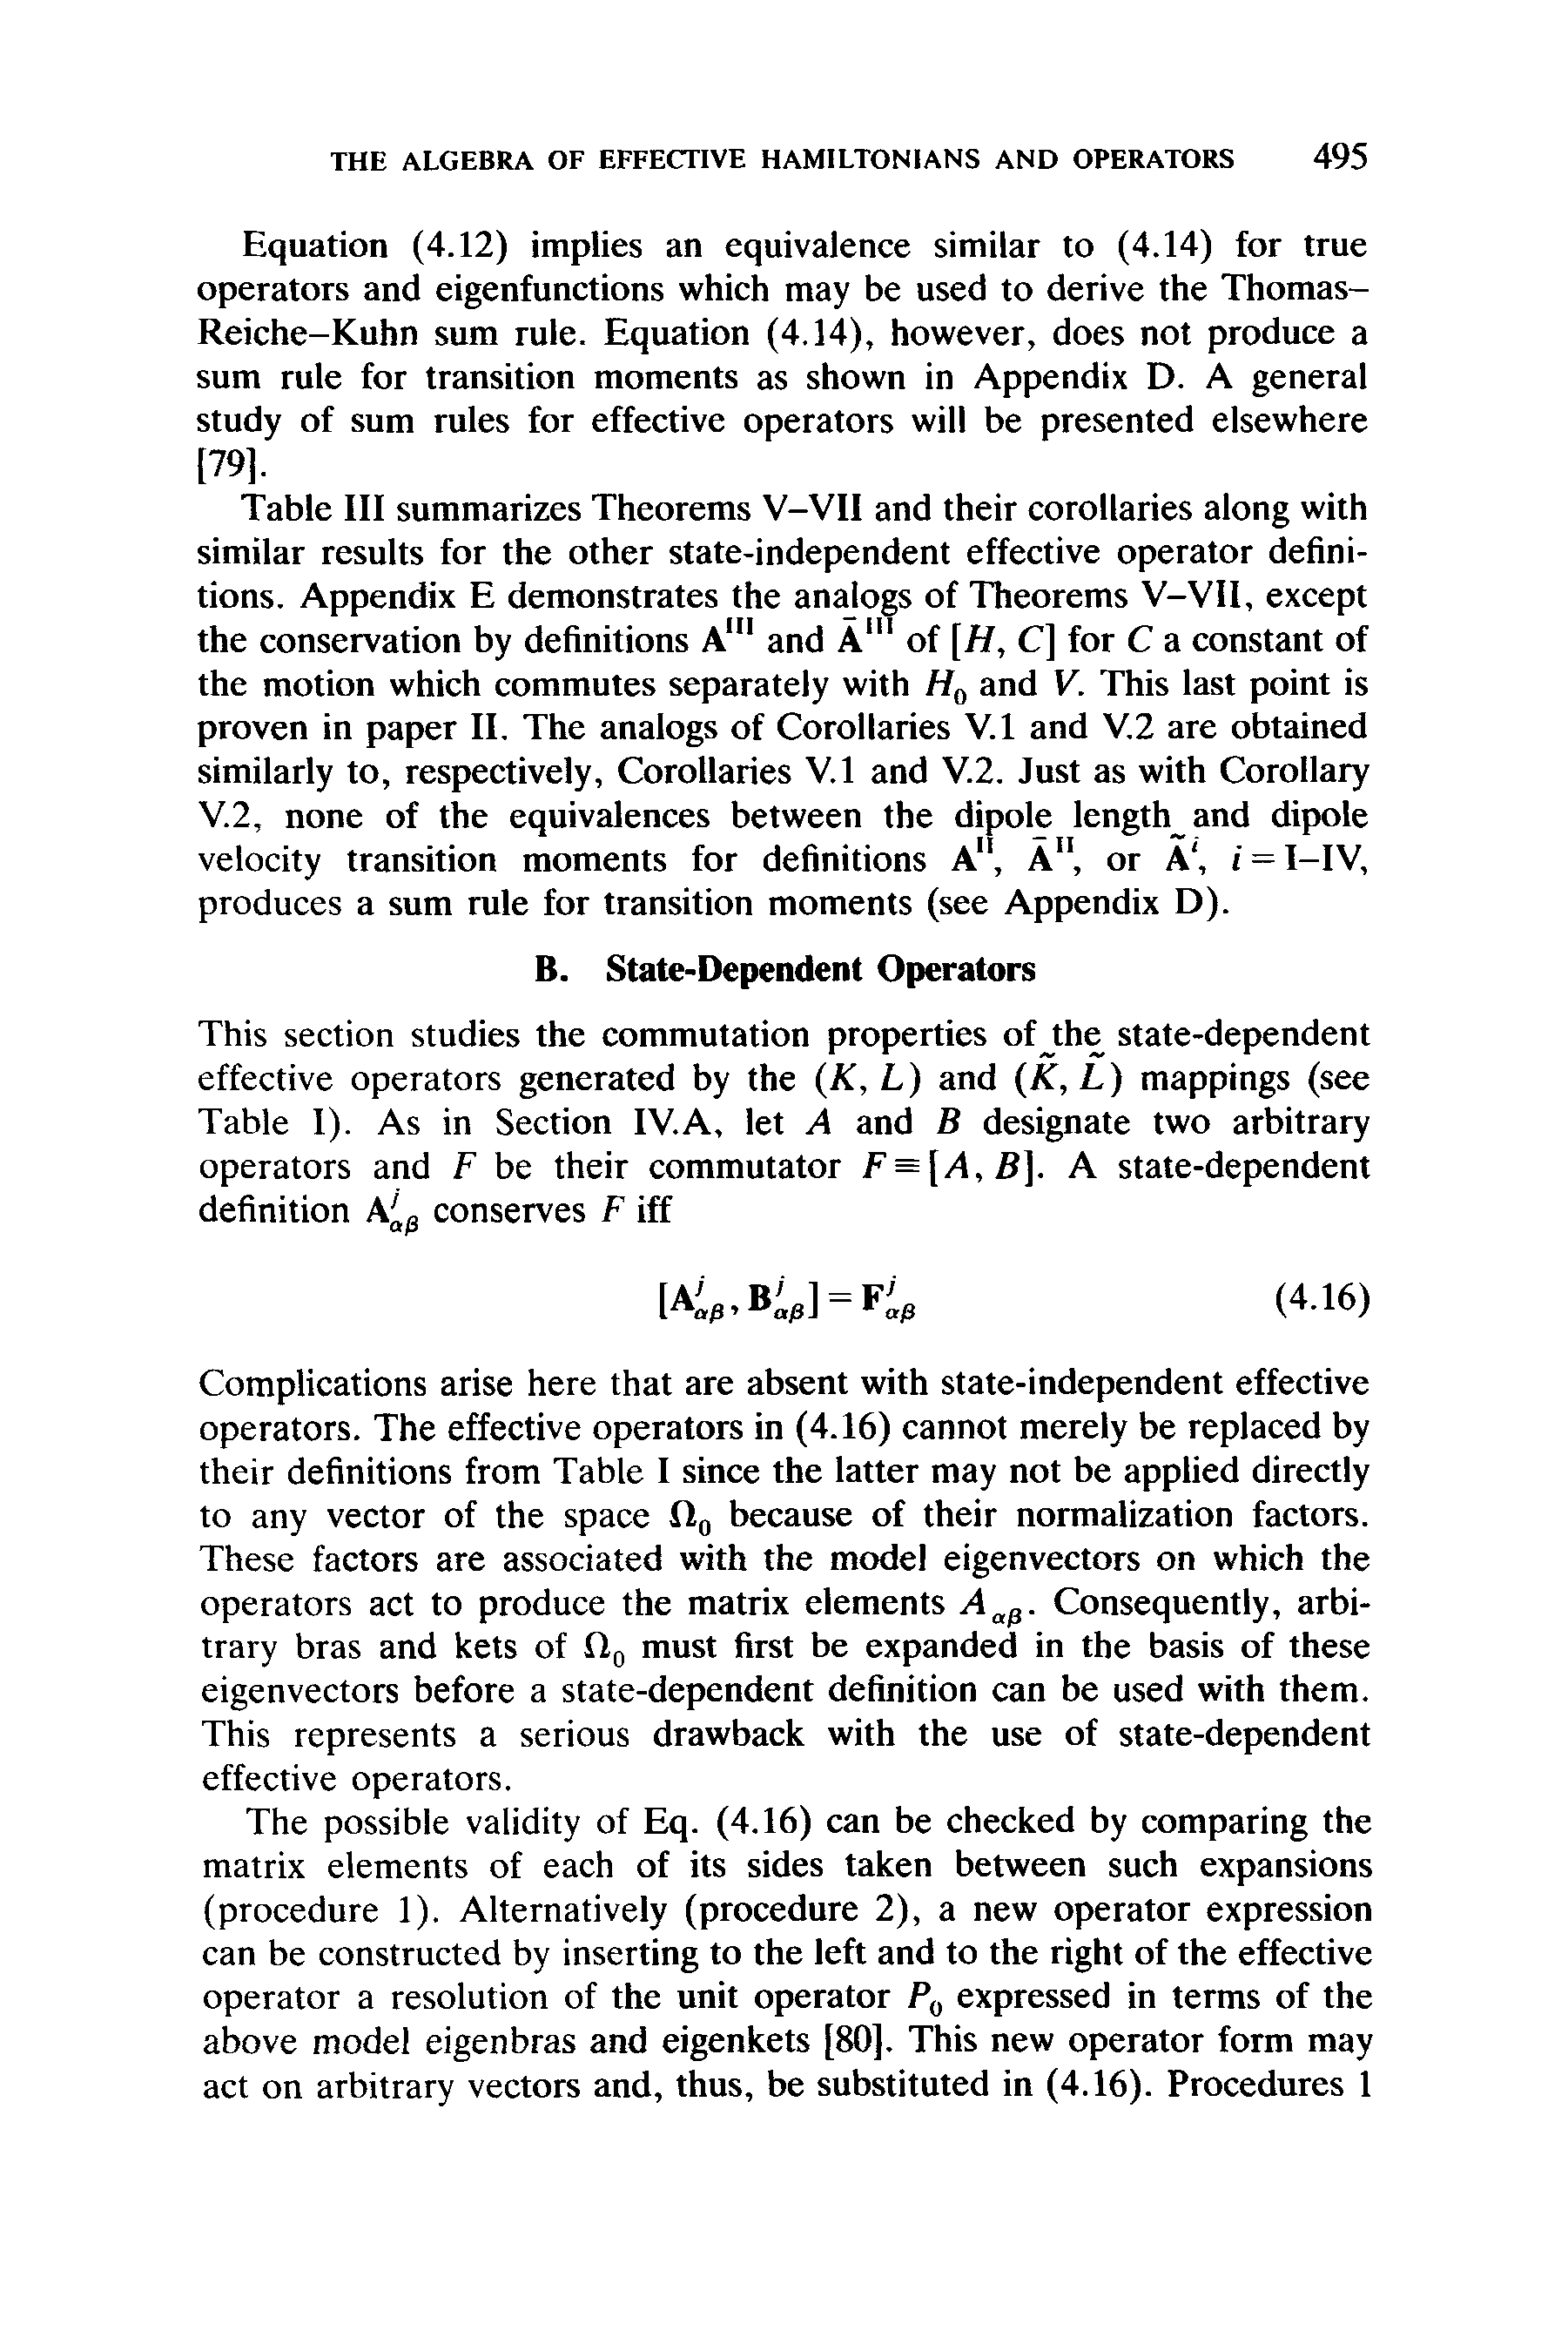 Table III summarizes Theorems V-VII and their corollaries along with similar results for the other state-independent effective operator definitions. Appendix E demonstrates the analogs of Theorems V-VII, except the conservation by definitions A" and A " of [H, C] for C a constant of the motion which commutes separately with and V. This last point is proven in paper II. The analogs of Corollaries V.l and V.2 are obtained similarly to, respectively. Corollaries V.l and V.2. Just as with Corollary V.2, none of the equivalences between the dipole length and dipole velocity transition moments for definitions A", A , or A , / = I-IV, produces a sum rule for transition moments (see Appendix D).